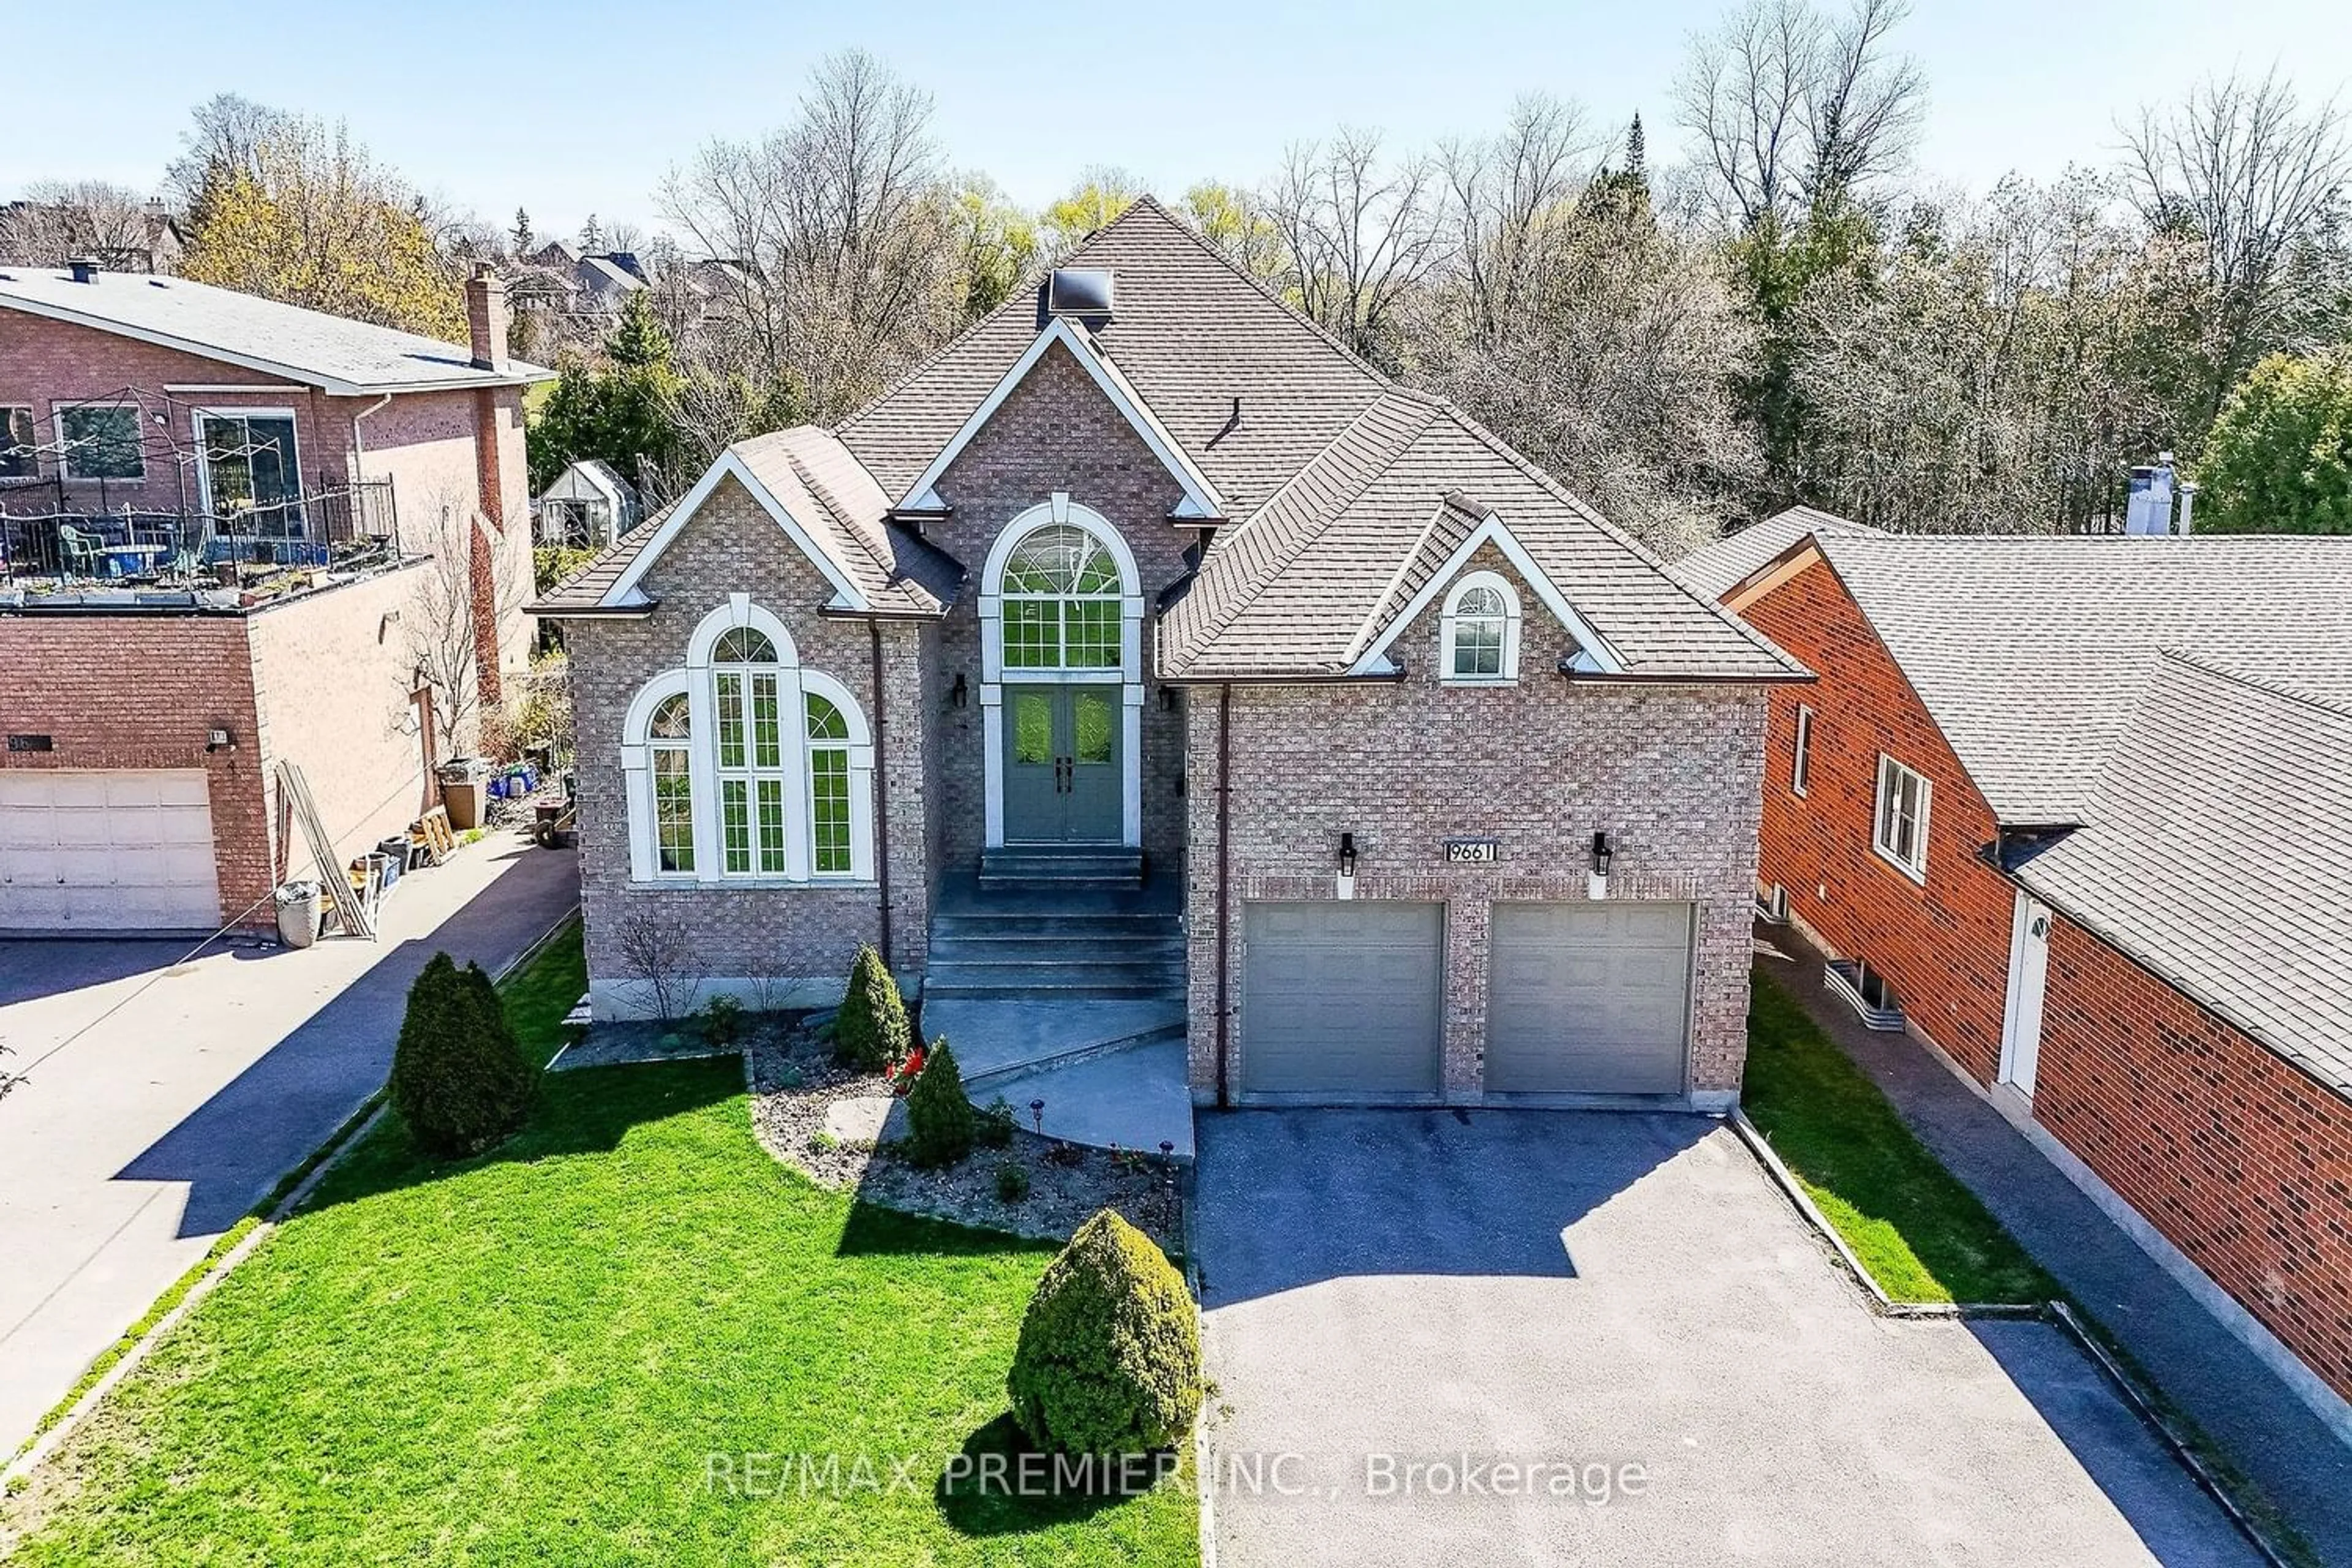 Home with brick exterior material for 9661 Bathurst St, Richmond Hill Ontario L4C 3X4